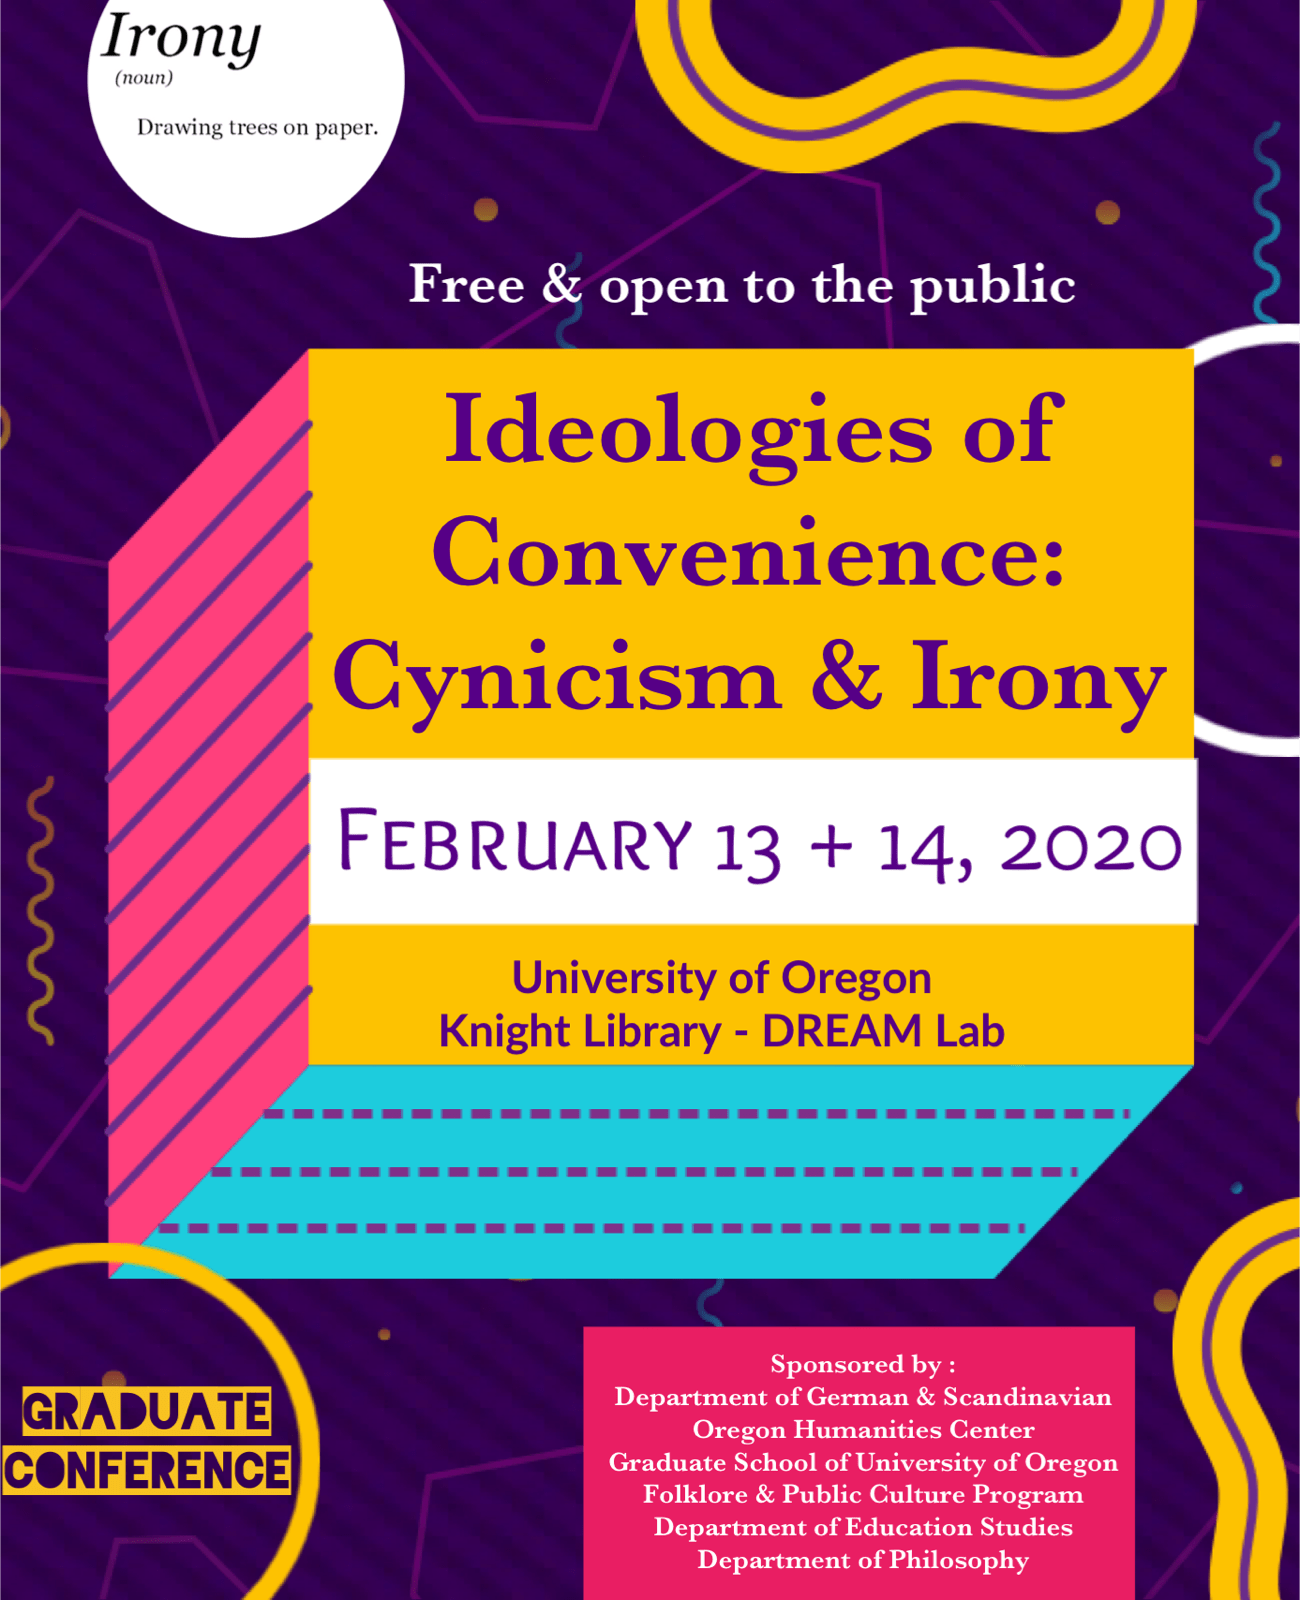 Flyer of graduate conference "Ideologies of Convenience: Cynicism & Irony"